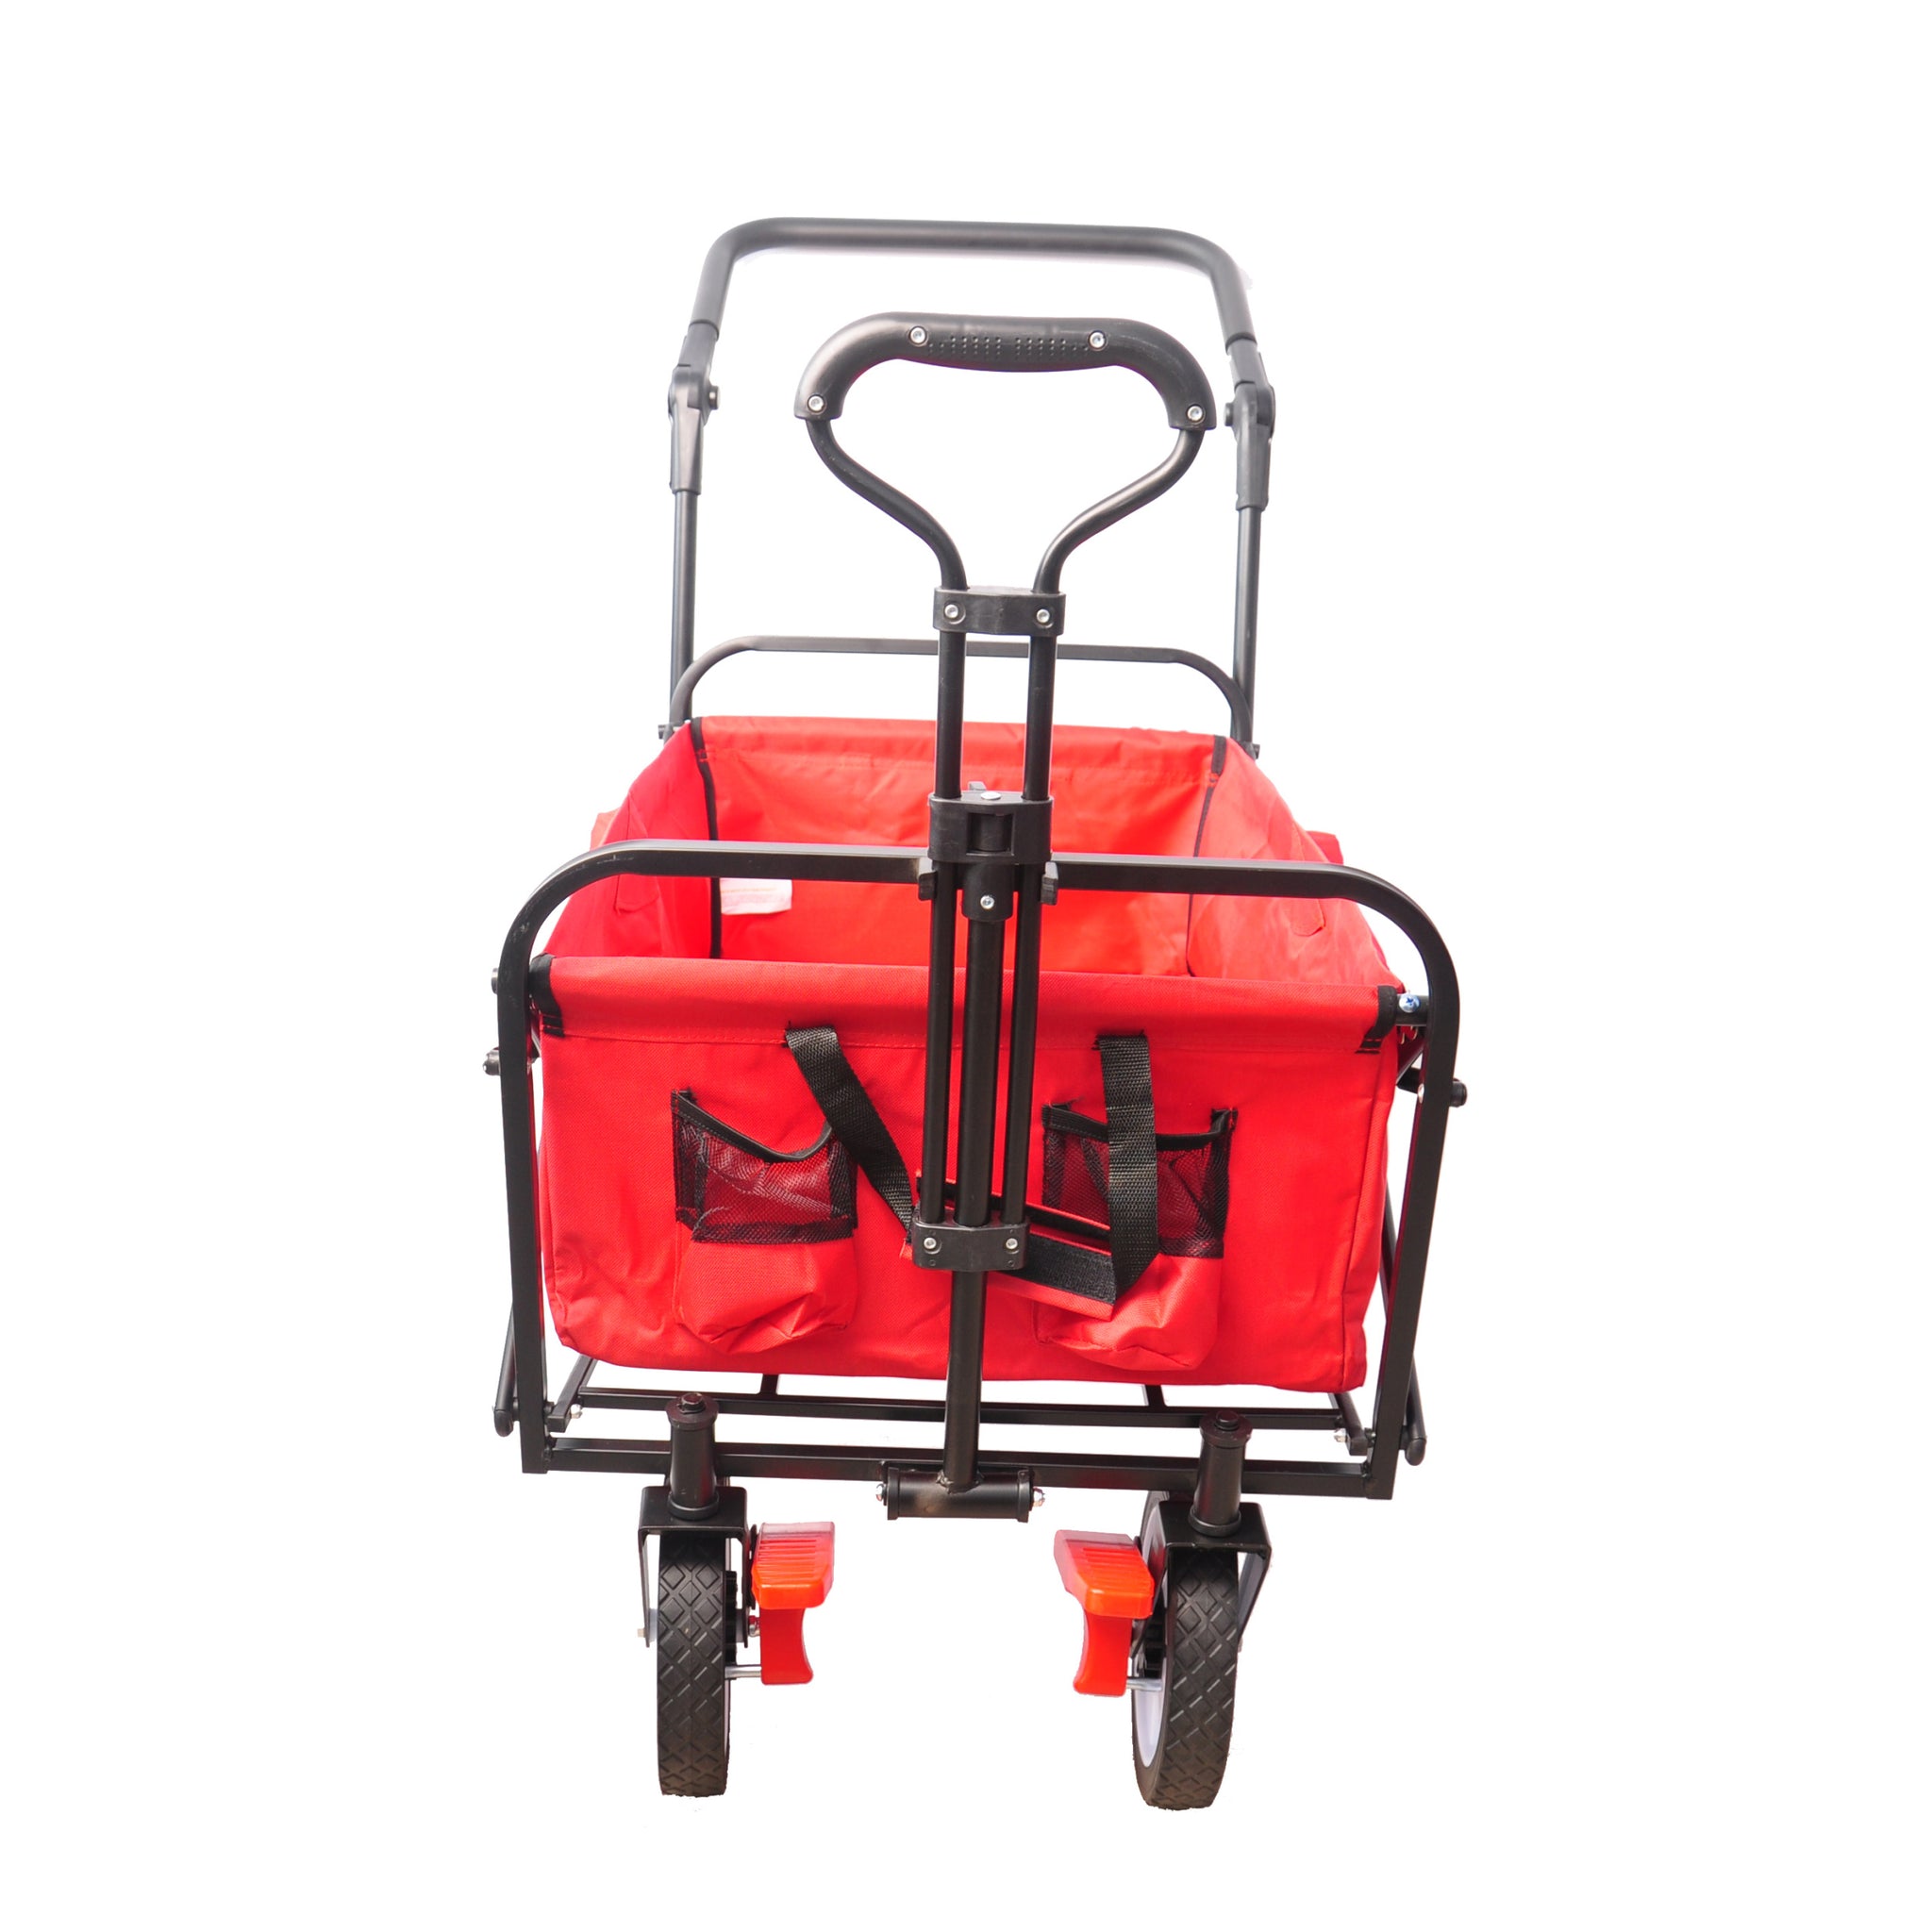 folding wagon Collapsible Outdoor Utility Wagon, Heavy red-abs+steel(q235)